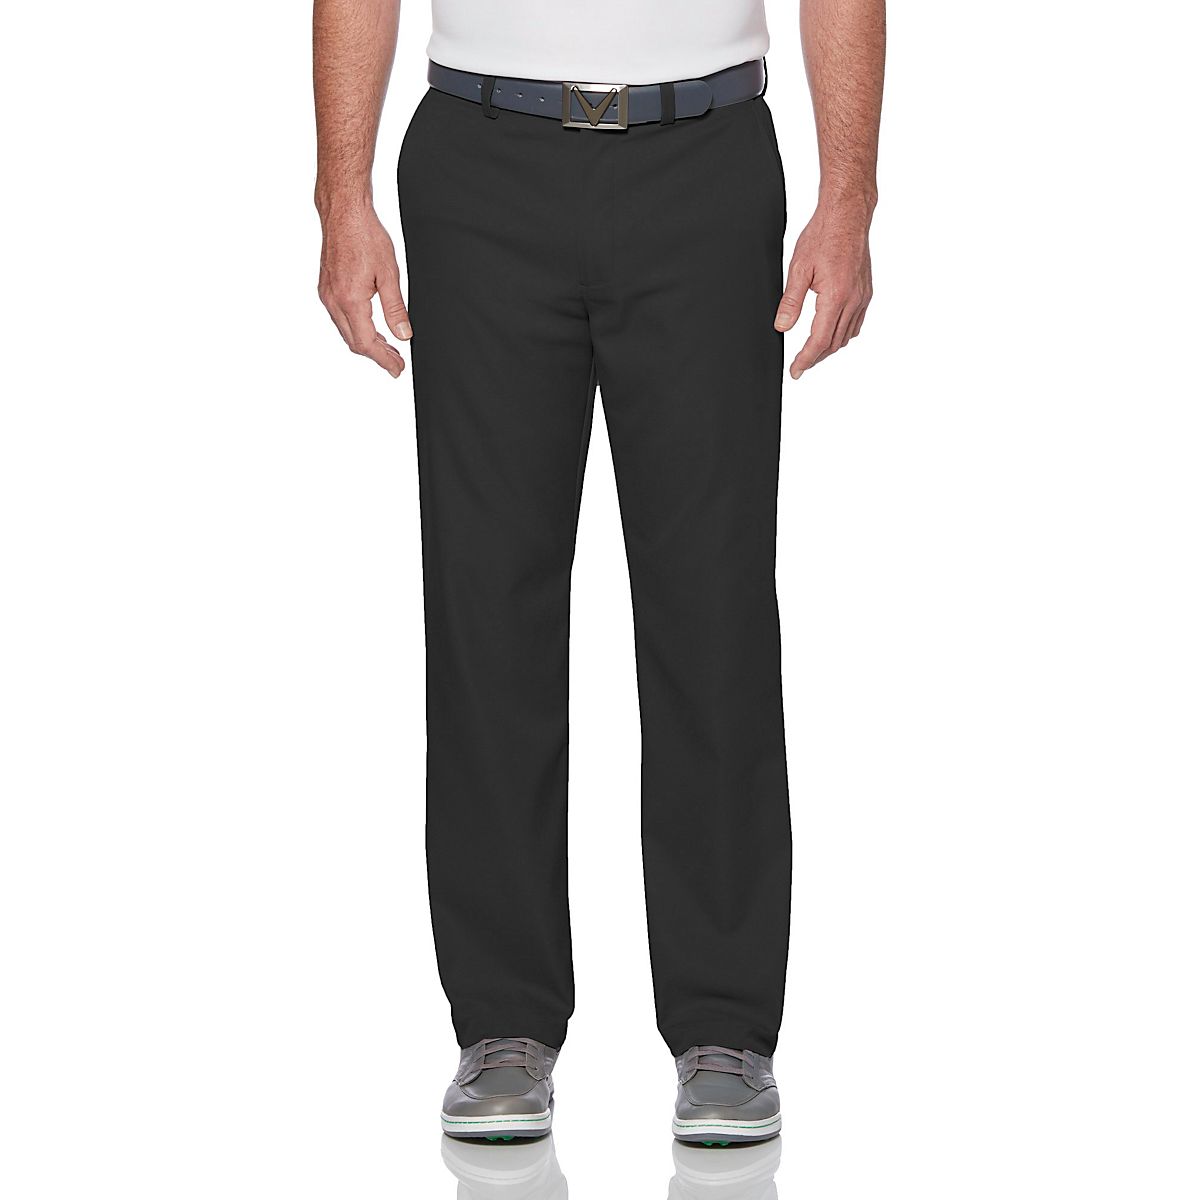 Callaway Men Stretch Pro Spin Pant with Active Waistband